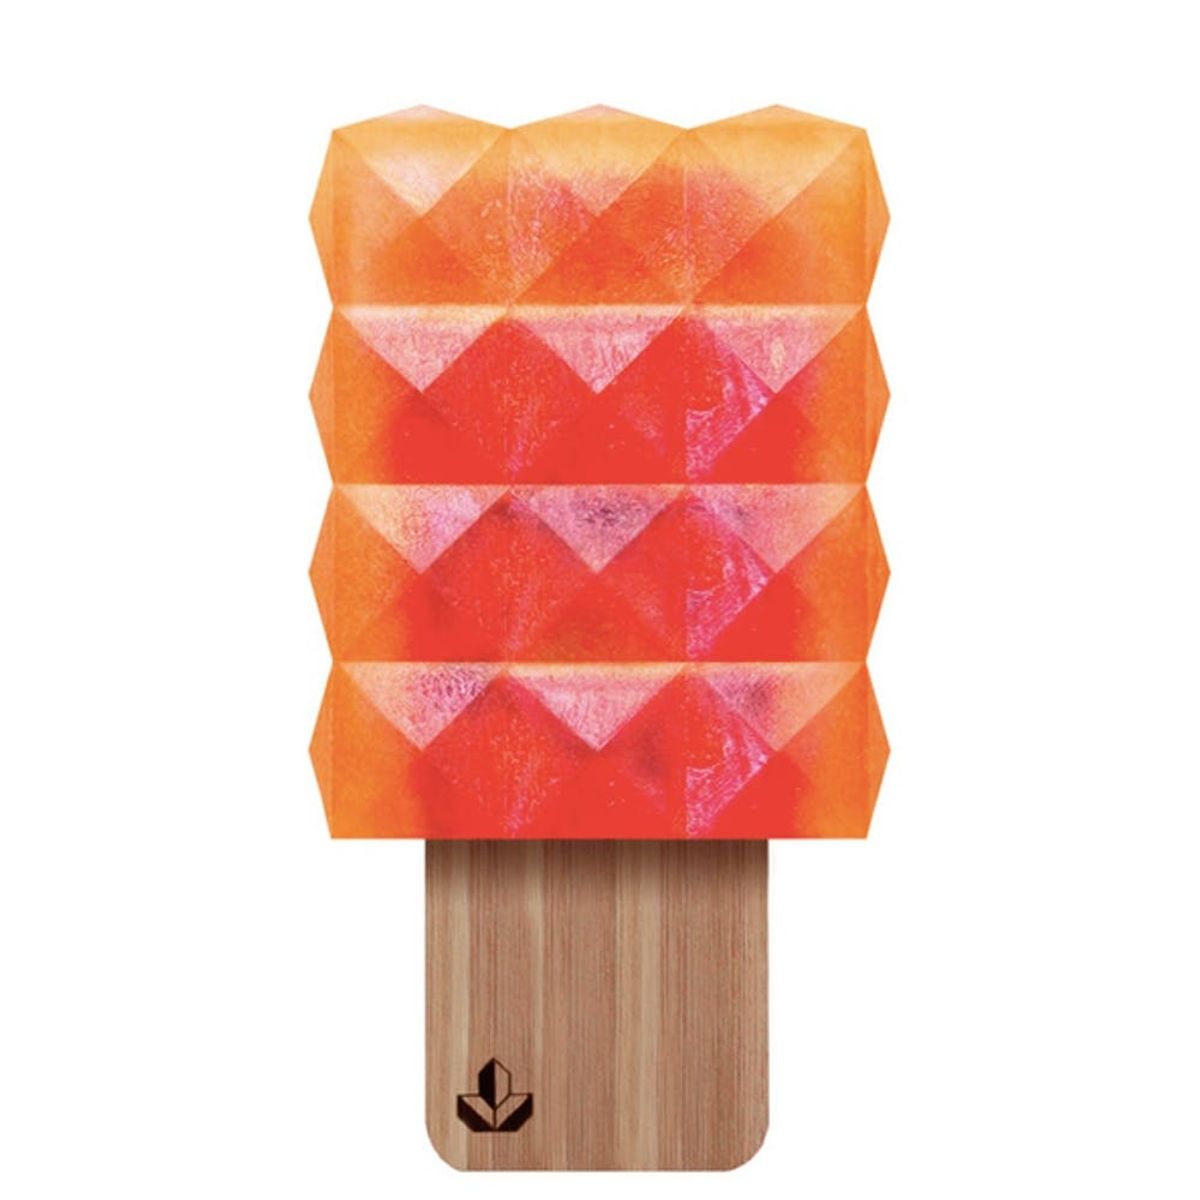 These Edible Popsicles Double As Art